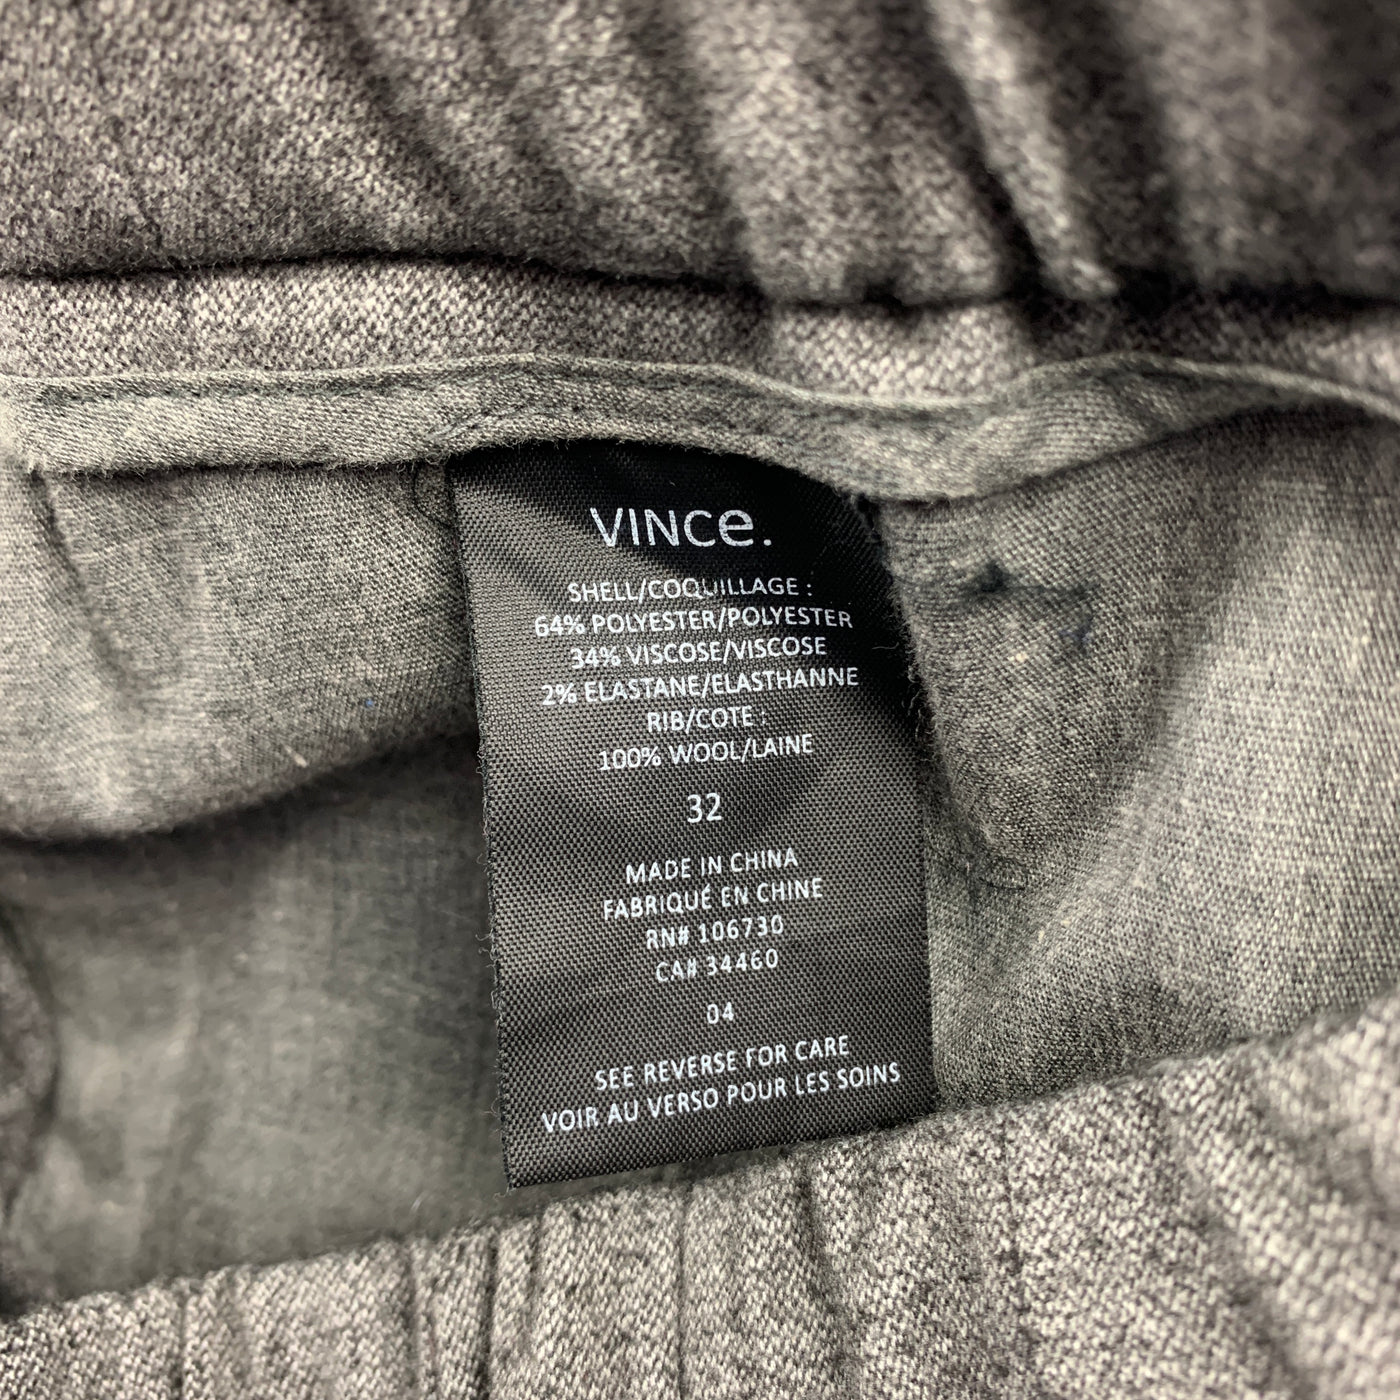 VINCE Size 32 Grey Heather Polyester Blend Elastic Waistband Casual Pants